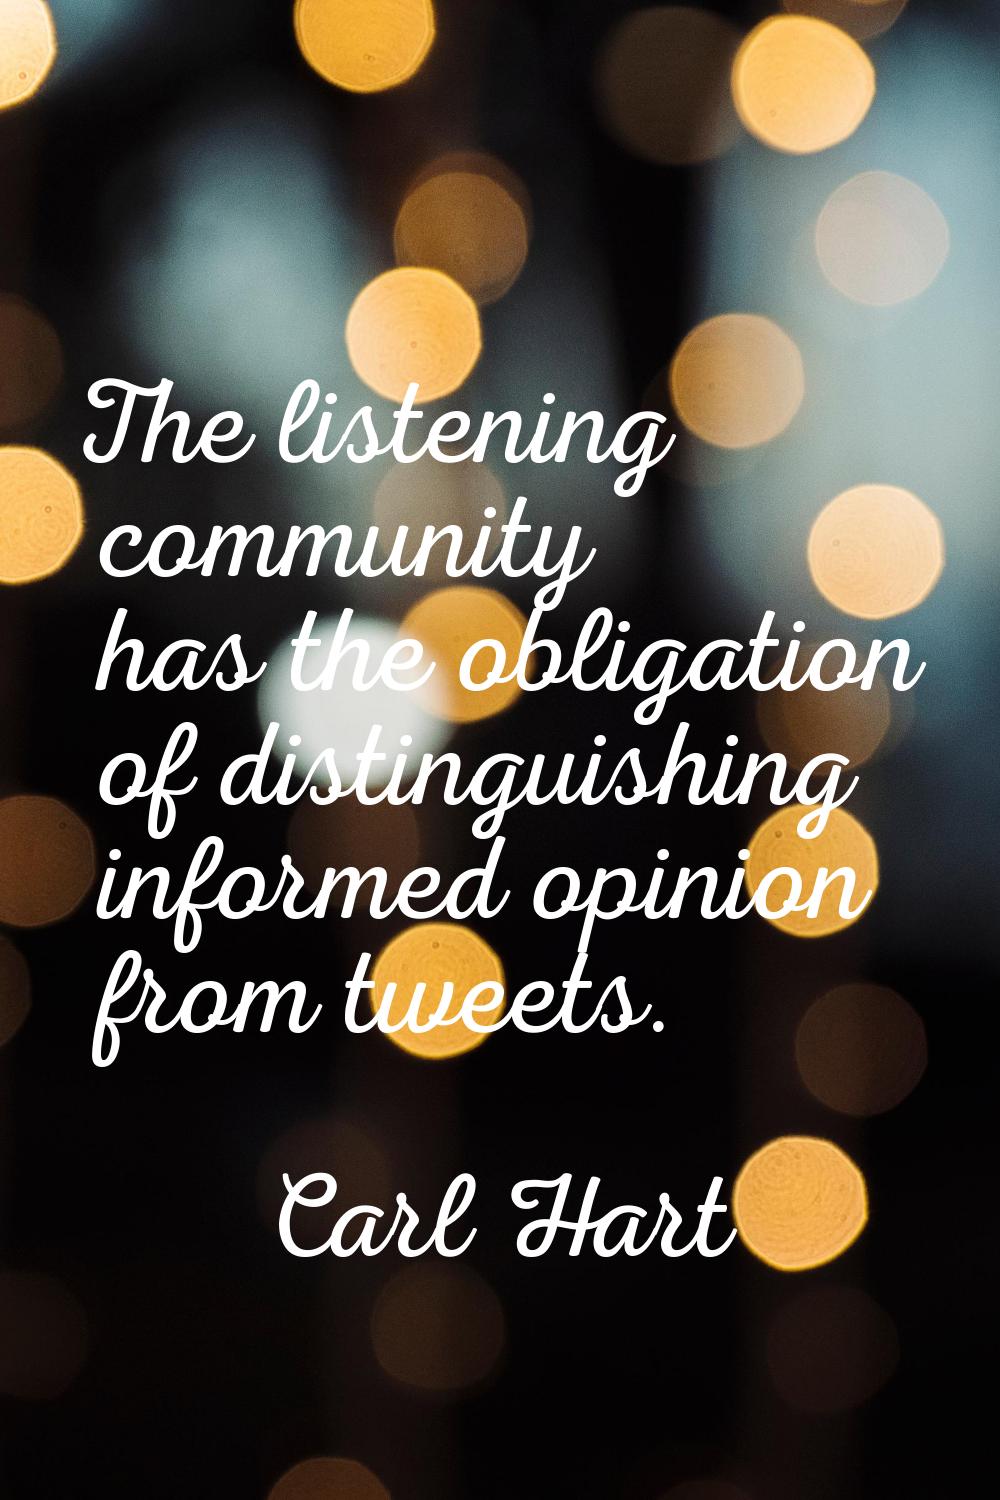 The listening community has the obligation of distinguishing informed opinion from tweets.